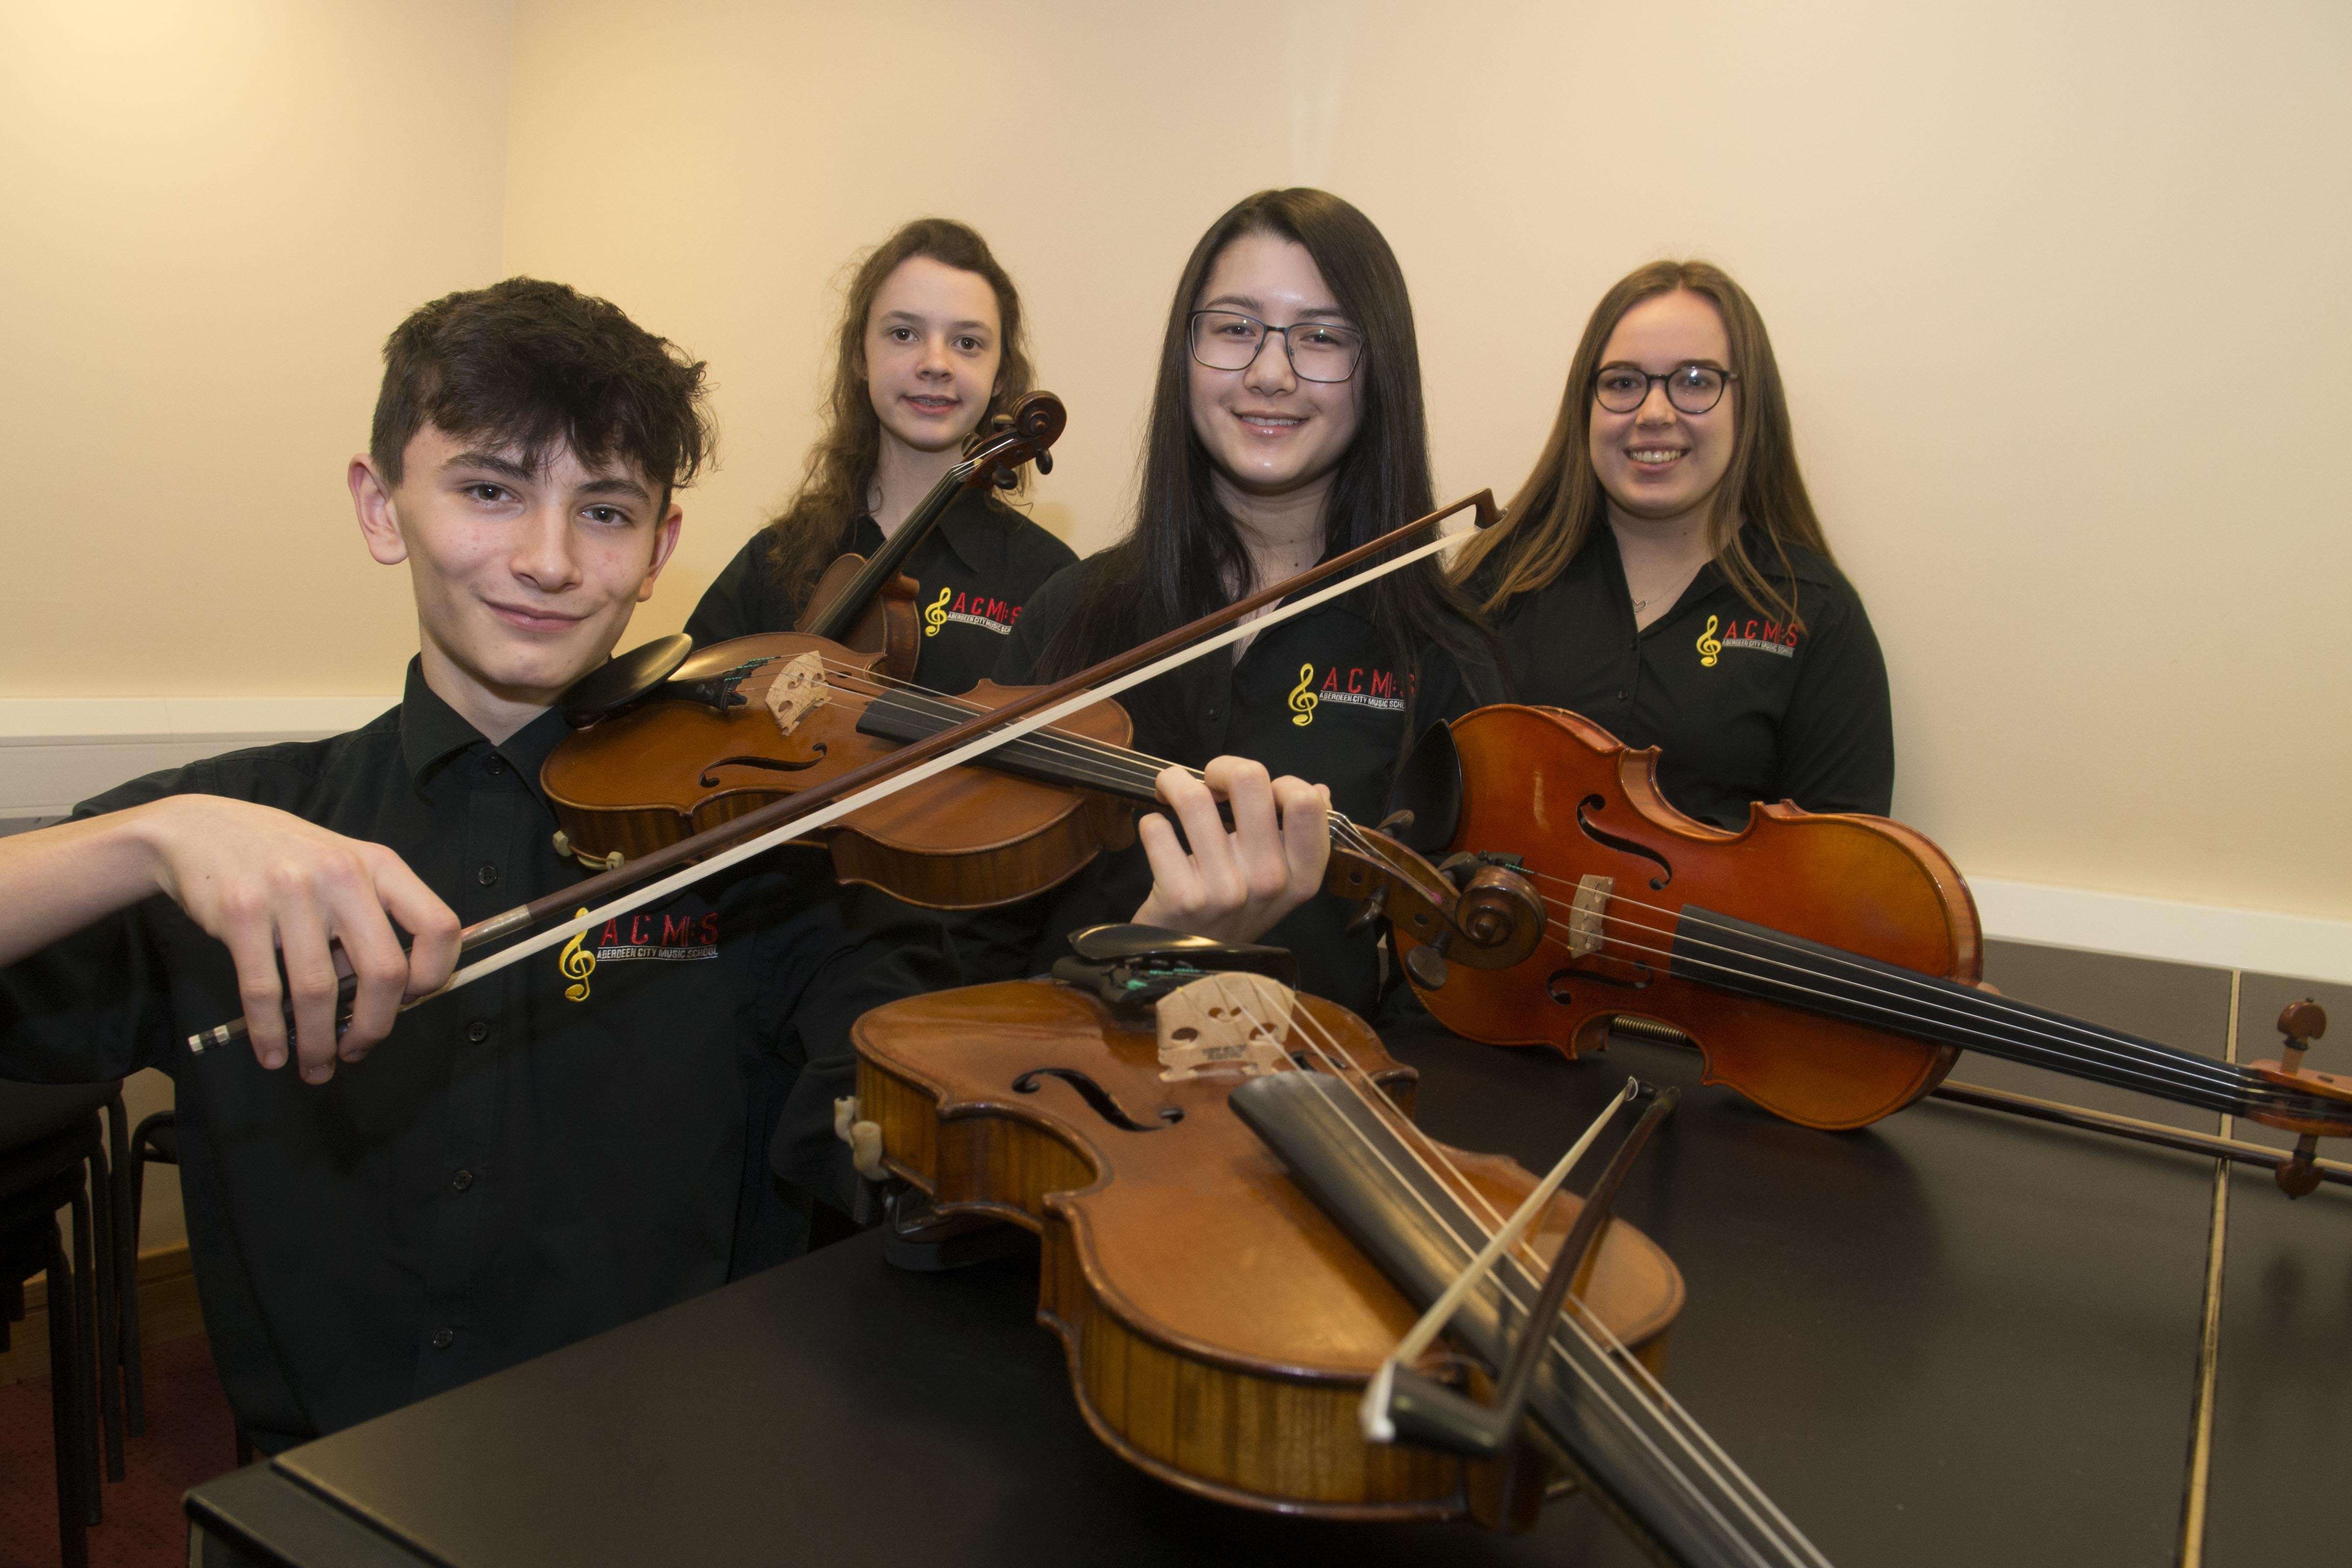 28/11/19 

L-R William Hodi,Charlotte Slater ,Sienna Lee and Ariana Black, 

Four pupils at Aberdeen City Music School are to play at the prestigious BBC Sports Personality of the Year event dinner next month.The awards, which have been a much-loved landmark in the UK’s sporting calendar since 1954 are making their Aberdeen debut at the new P&J Live venue on Sunday 15 December.The school’s talented string ensemble, comprising students Ariana Black, William Hodi, Charlotte Slater and Sienna Lee, will entertain the corporate audience before they head into the main show with a 30-minute programme performed during the award’s pre-dinner.